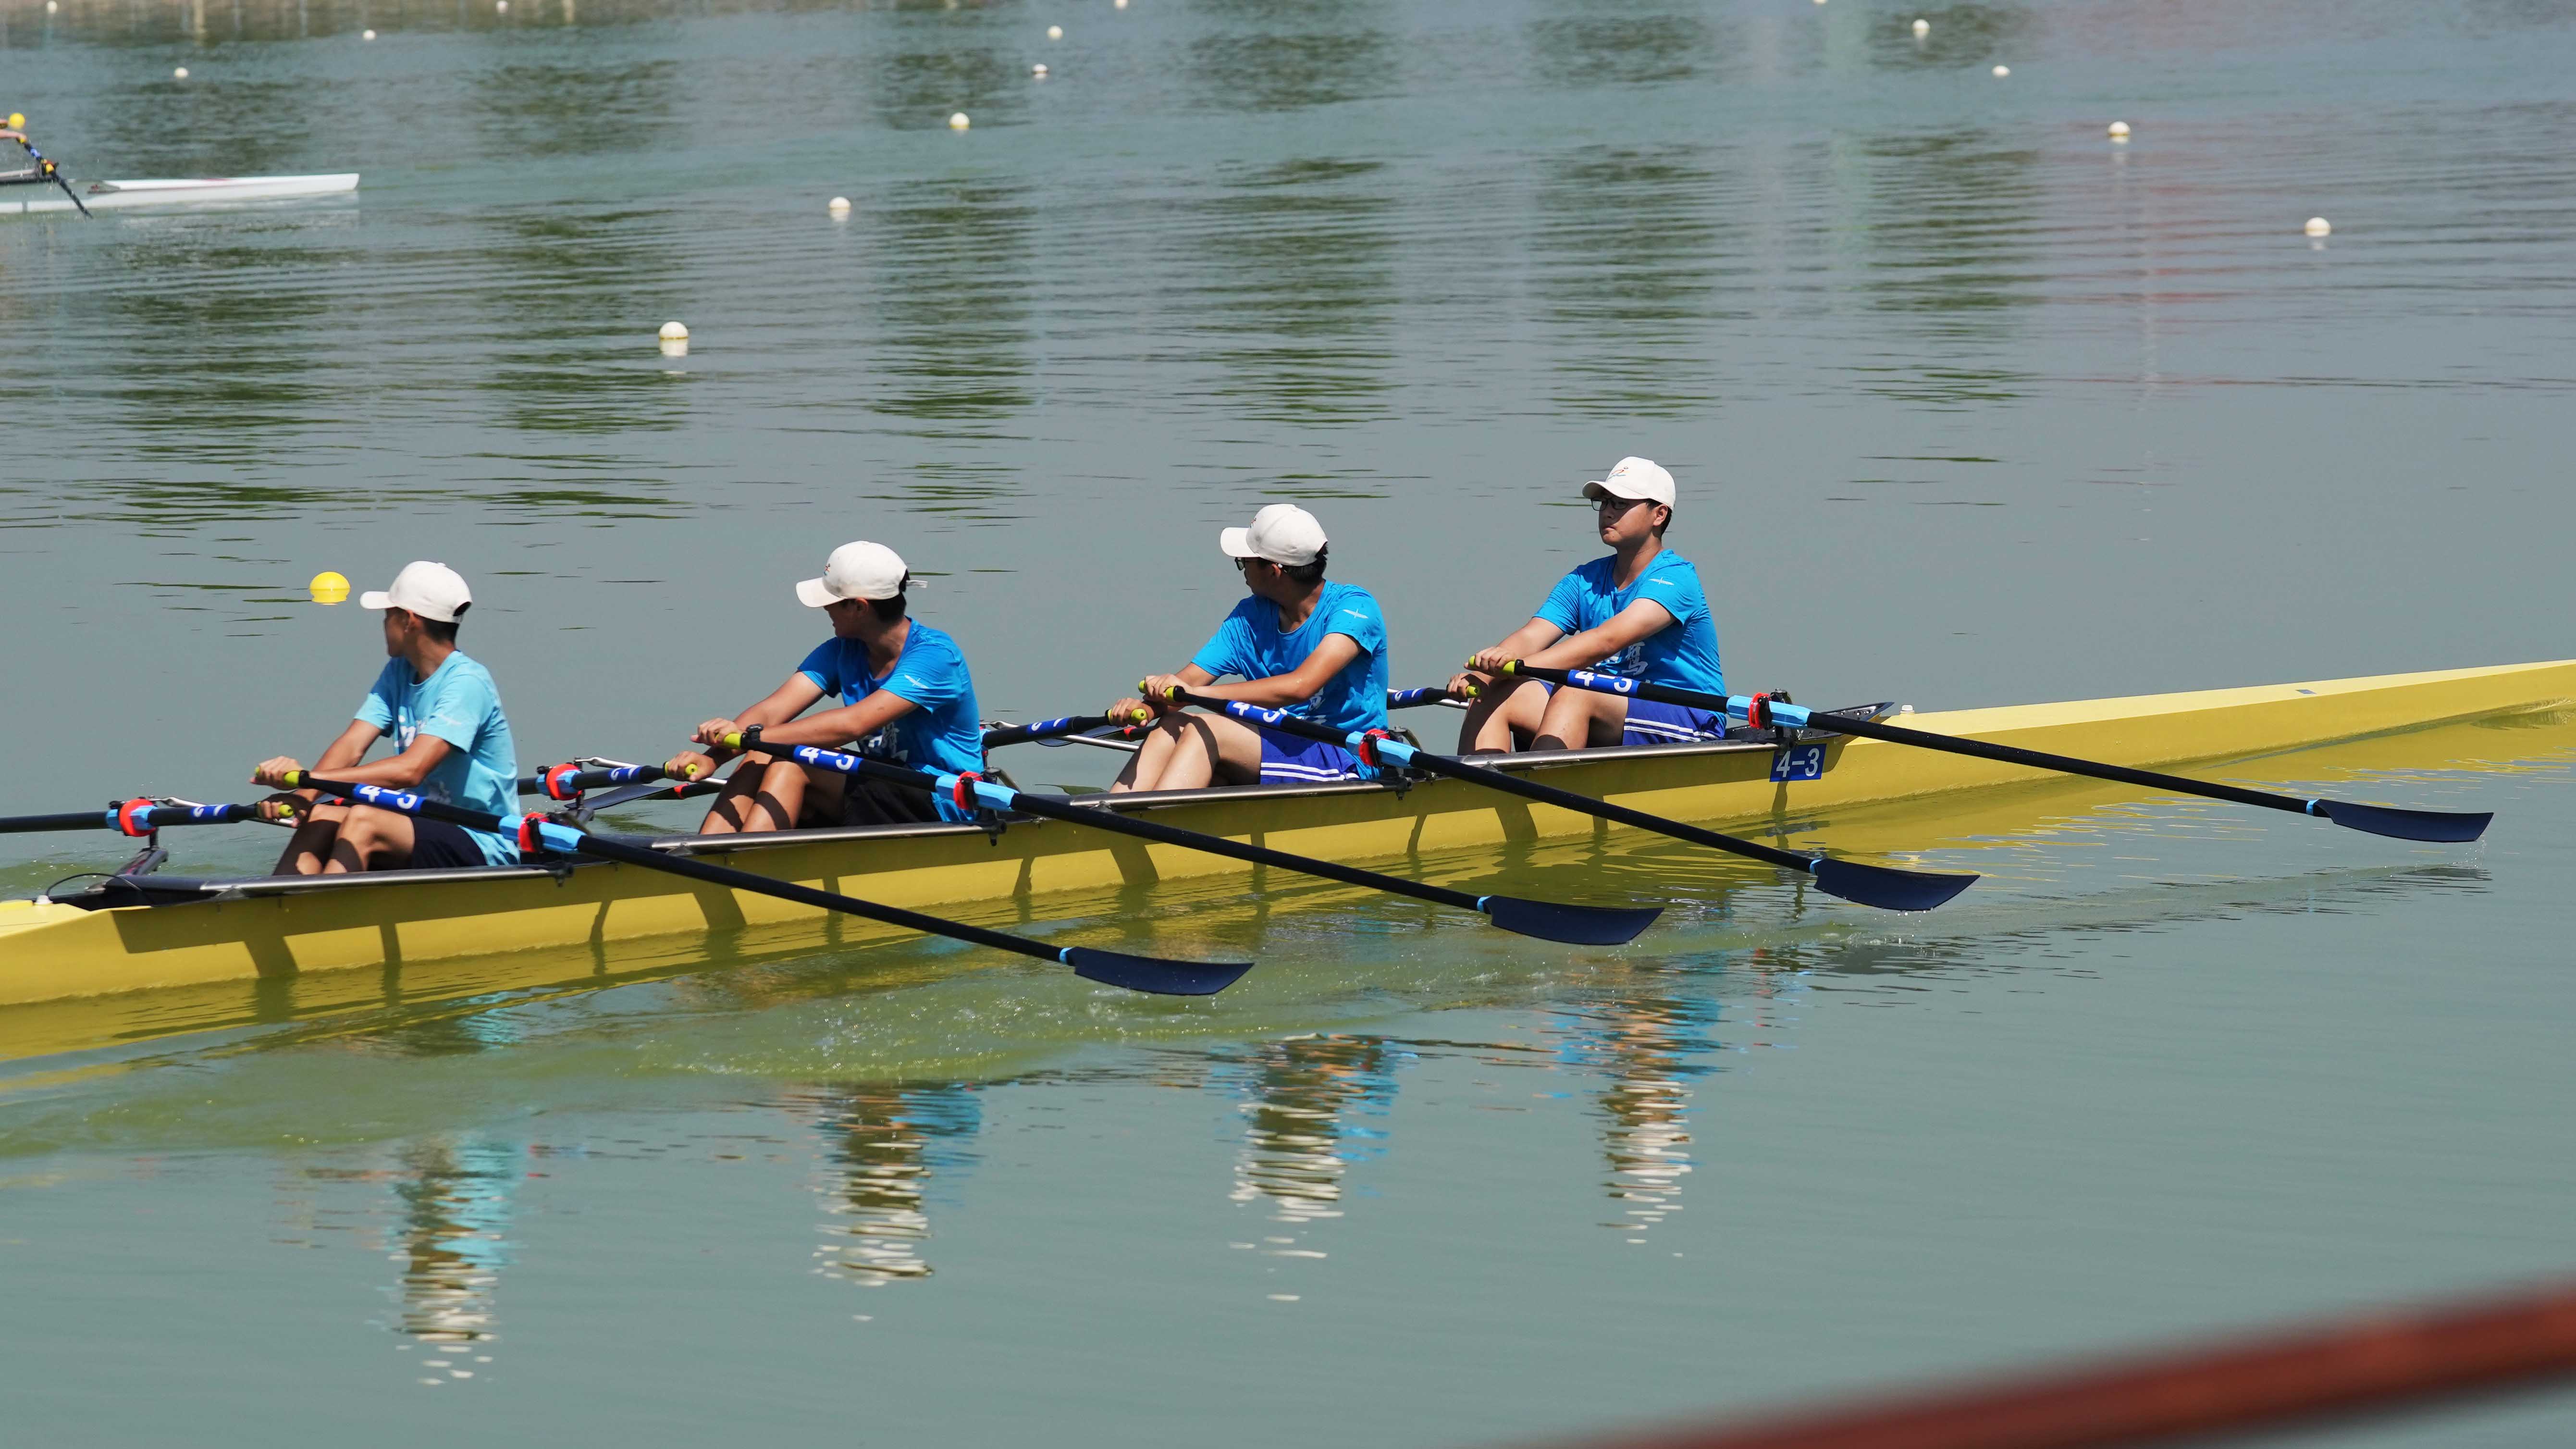 About 500 rowing lovers participate in a rowing event in Beijing